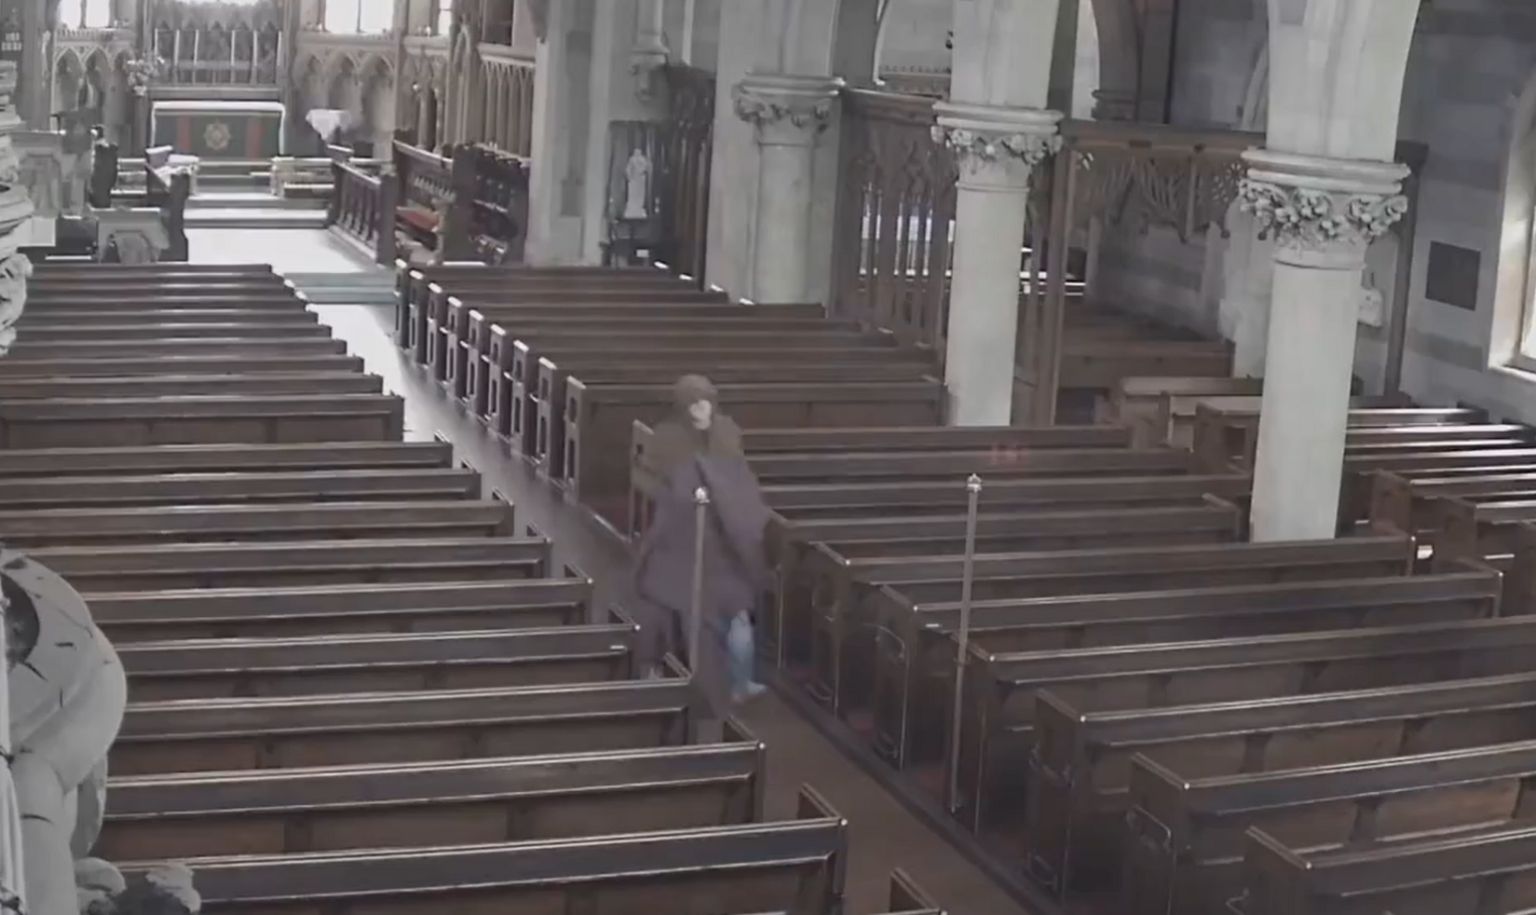 Man leaving church with stolen eagle